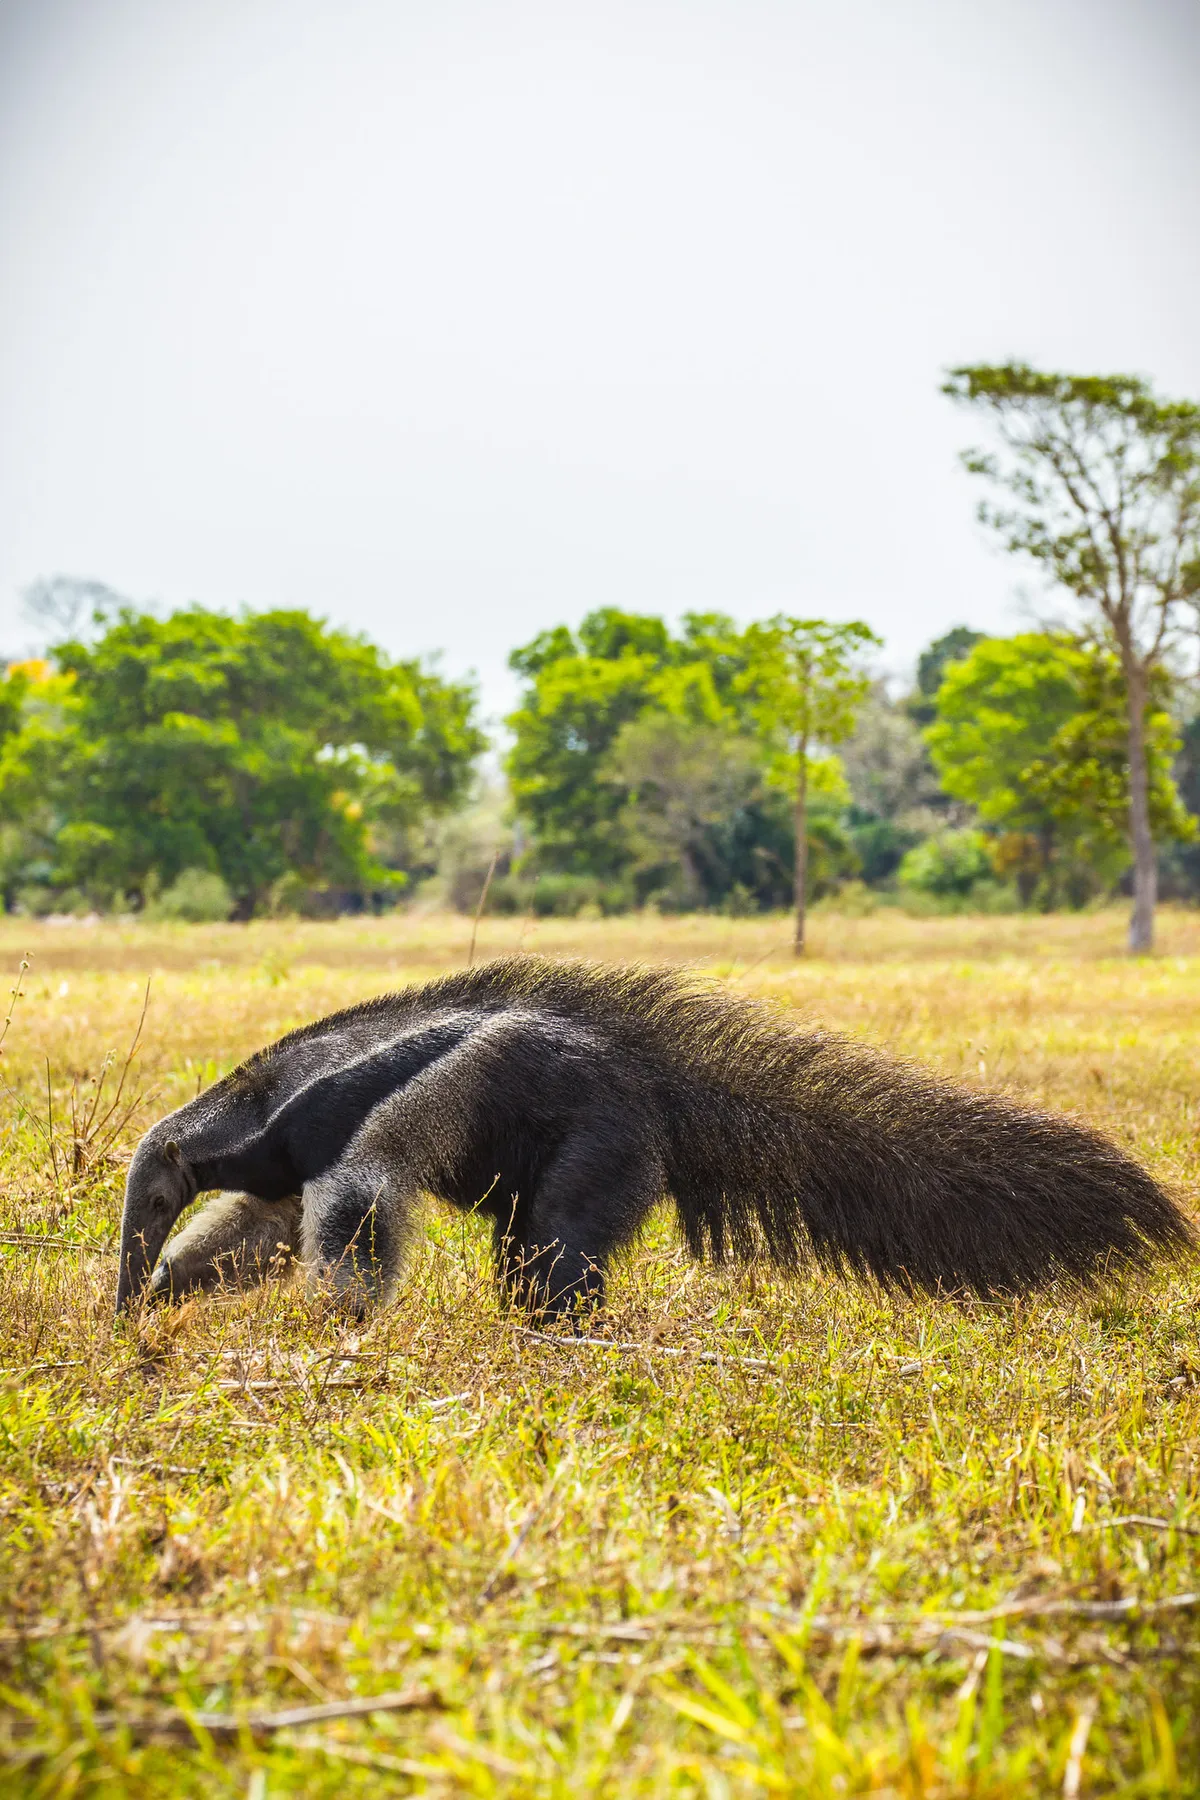 Giant anteater in Brazil. © pixelplastic (used under a Creative Commons licence)